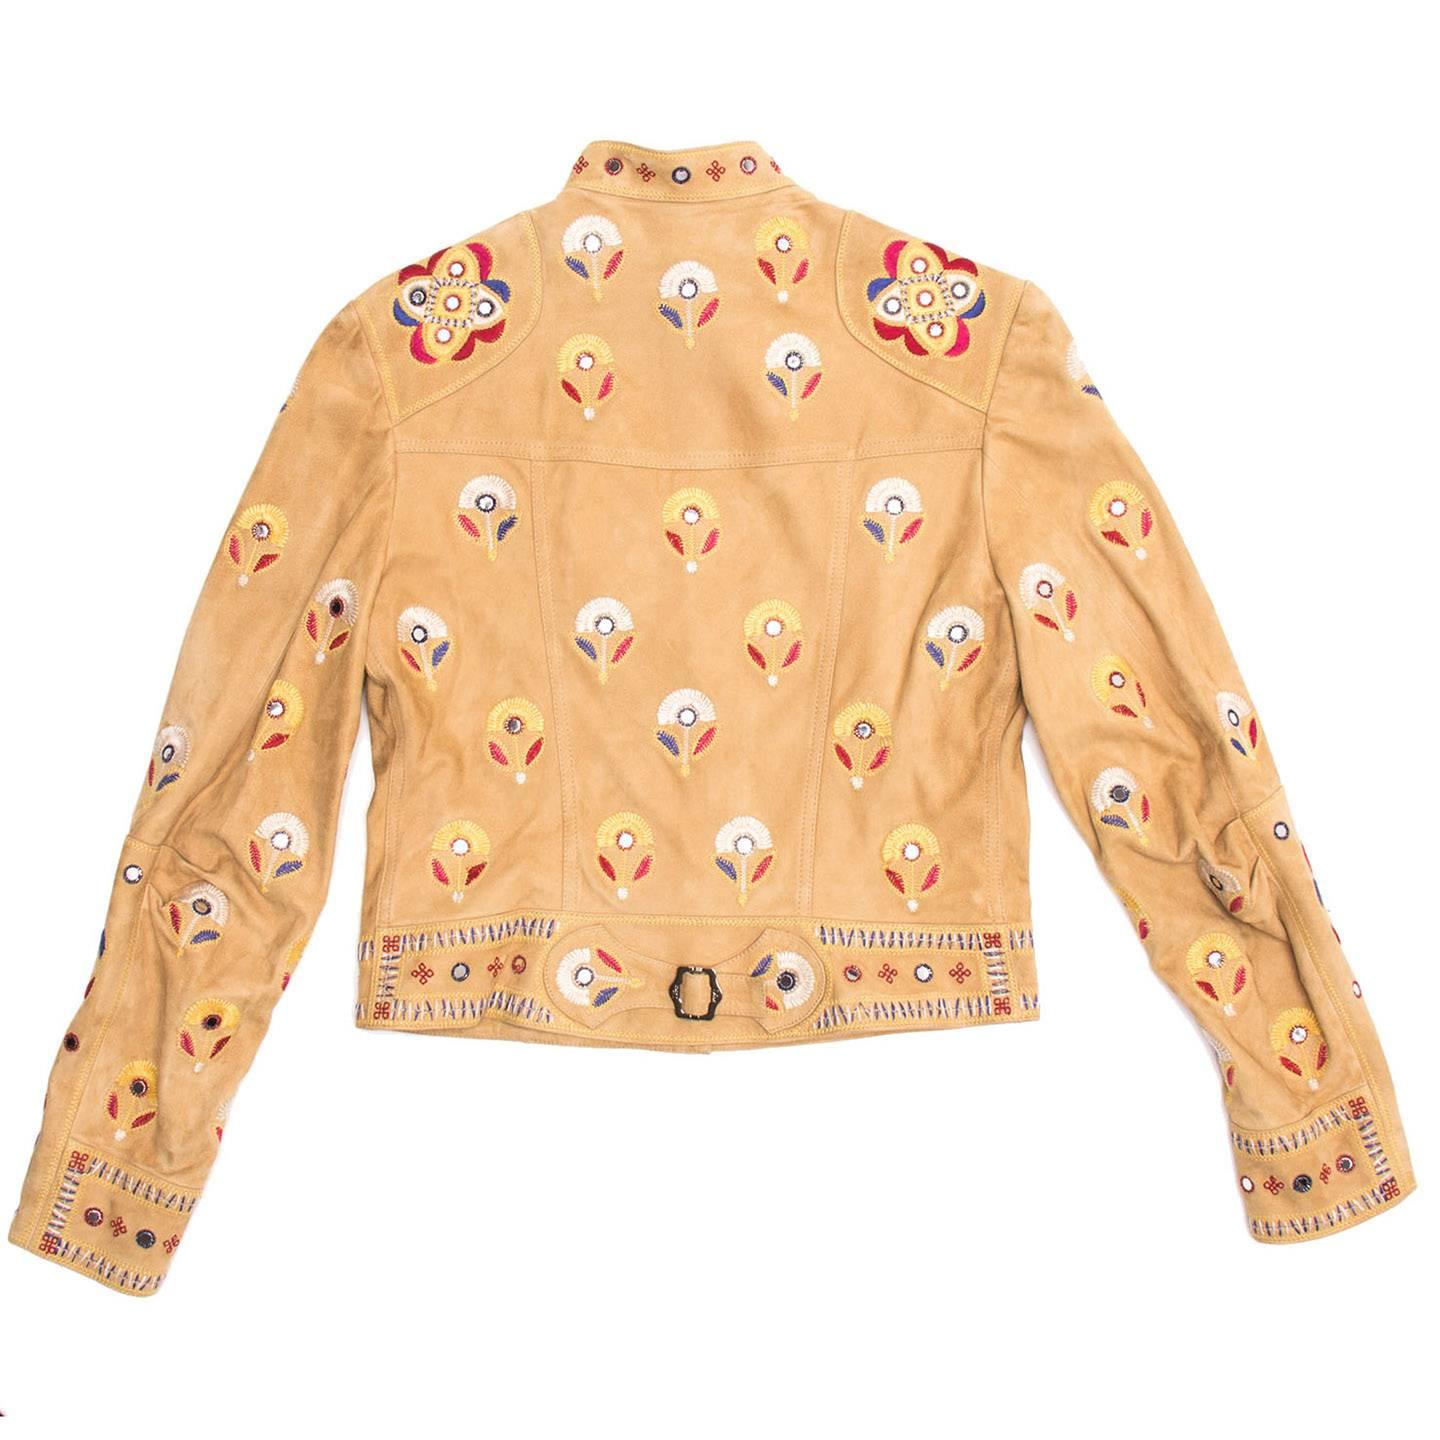 Indian textile inspired tan suede moto jacket. The jacket is enriched by a beautiful white, red, blue and yellow floral embroidery with mirror details. Made in France.

Size  40 French sizing
Condition  Excellent: never worn